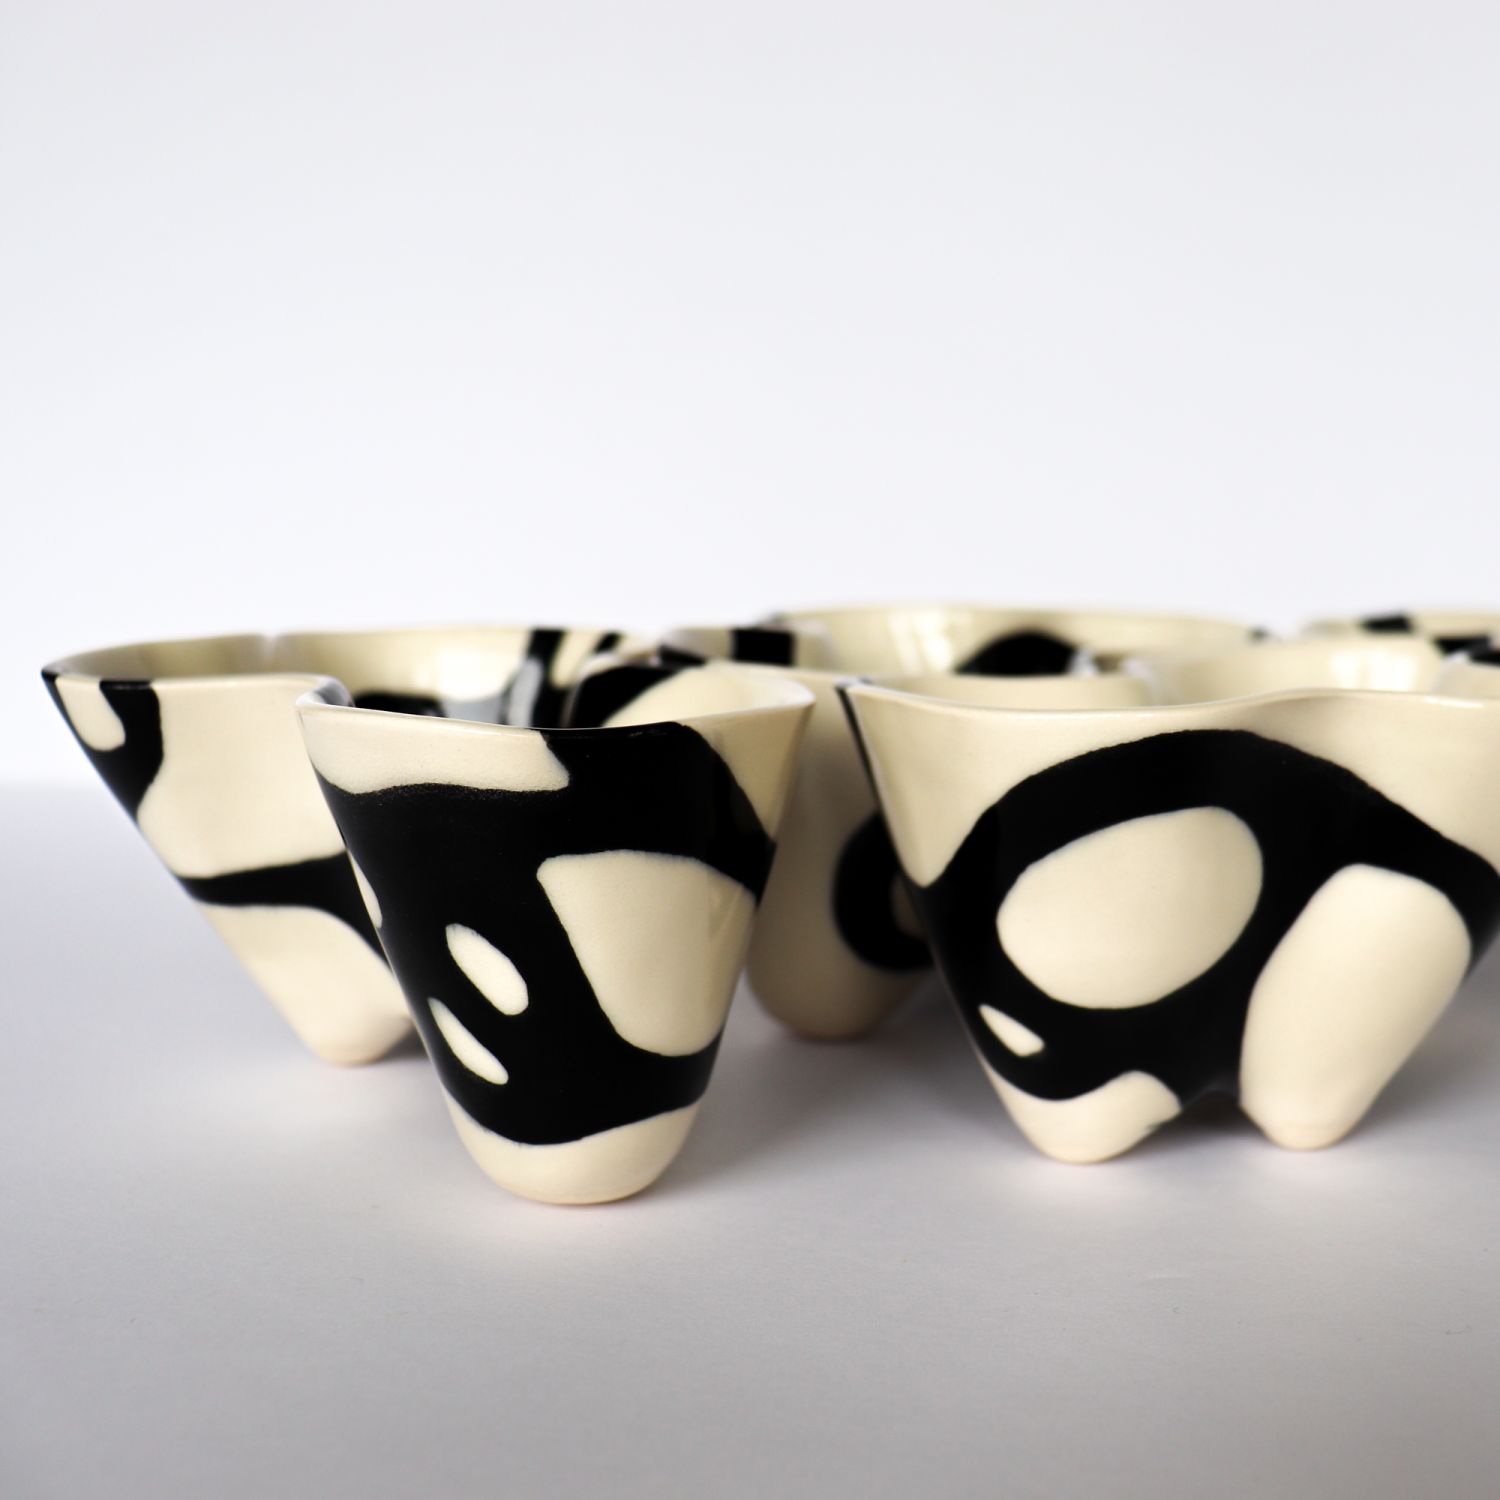 Alana Marcoccia: Interconnected Sculptural Bowl Product Image 6 of 13